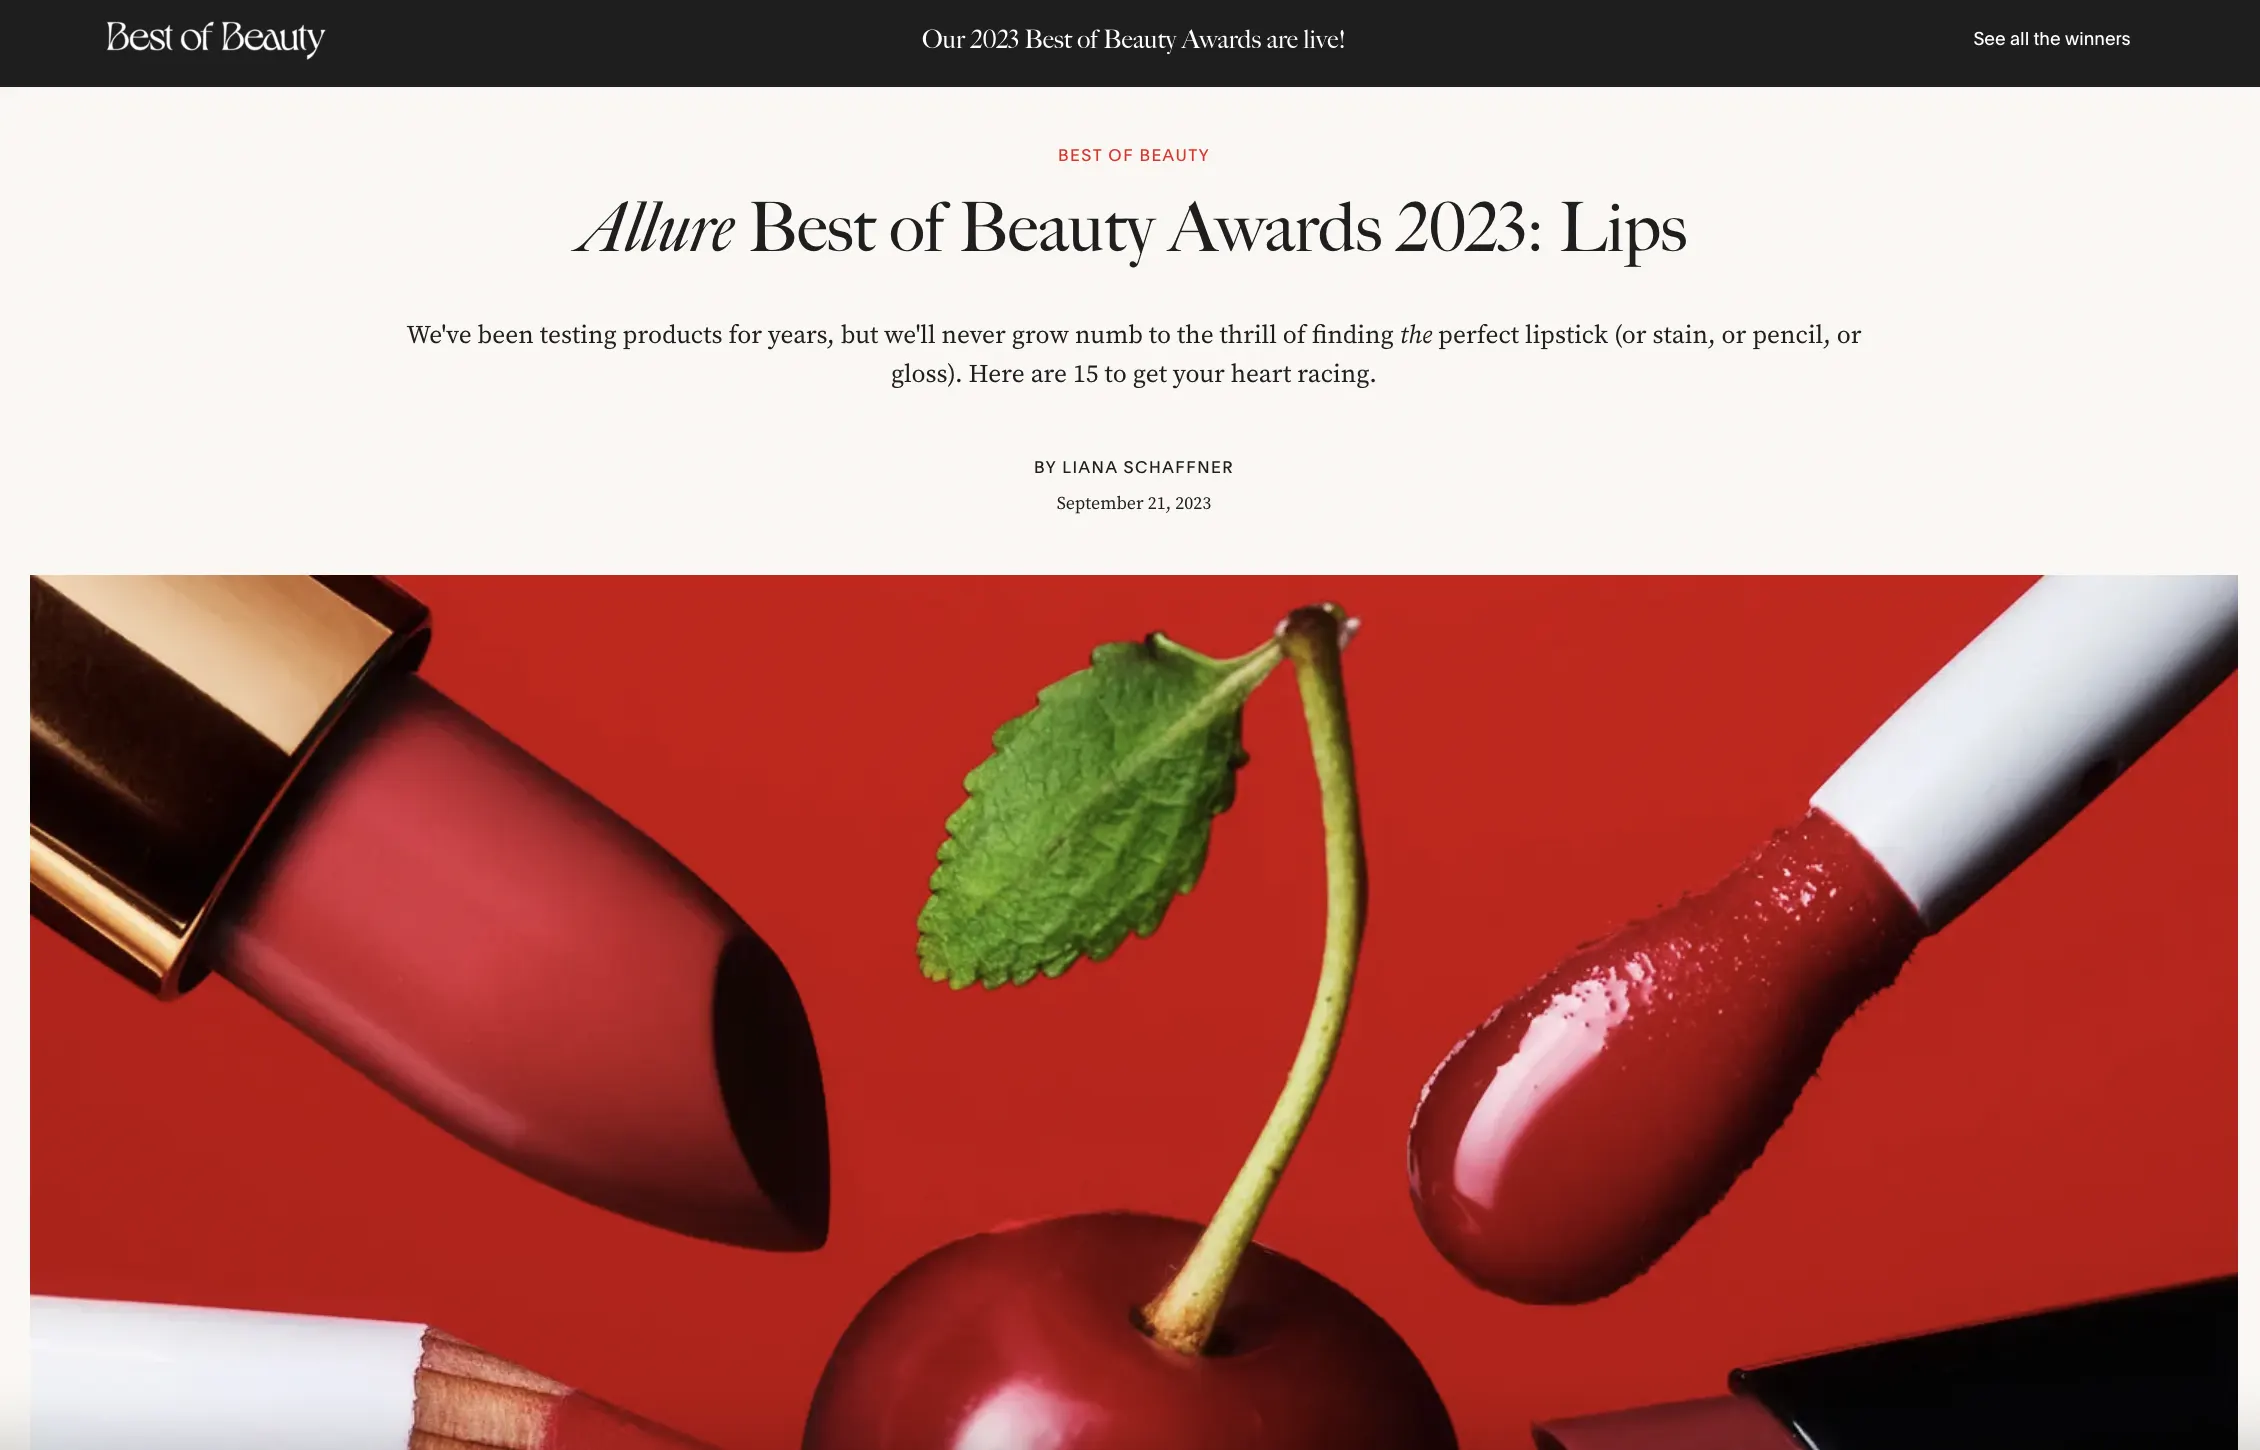 Kandesn® Lip Colors Win Allure Magazine’s Best of Beauty Award